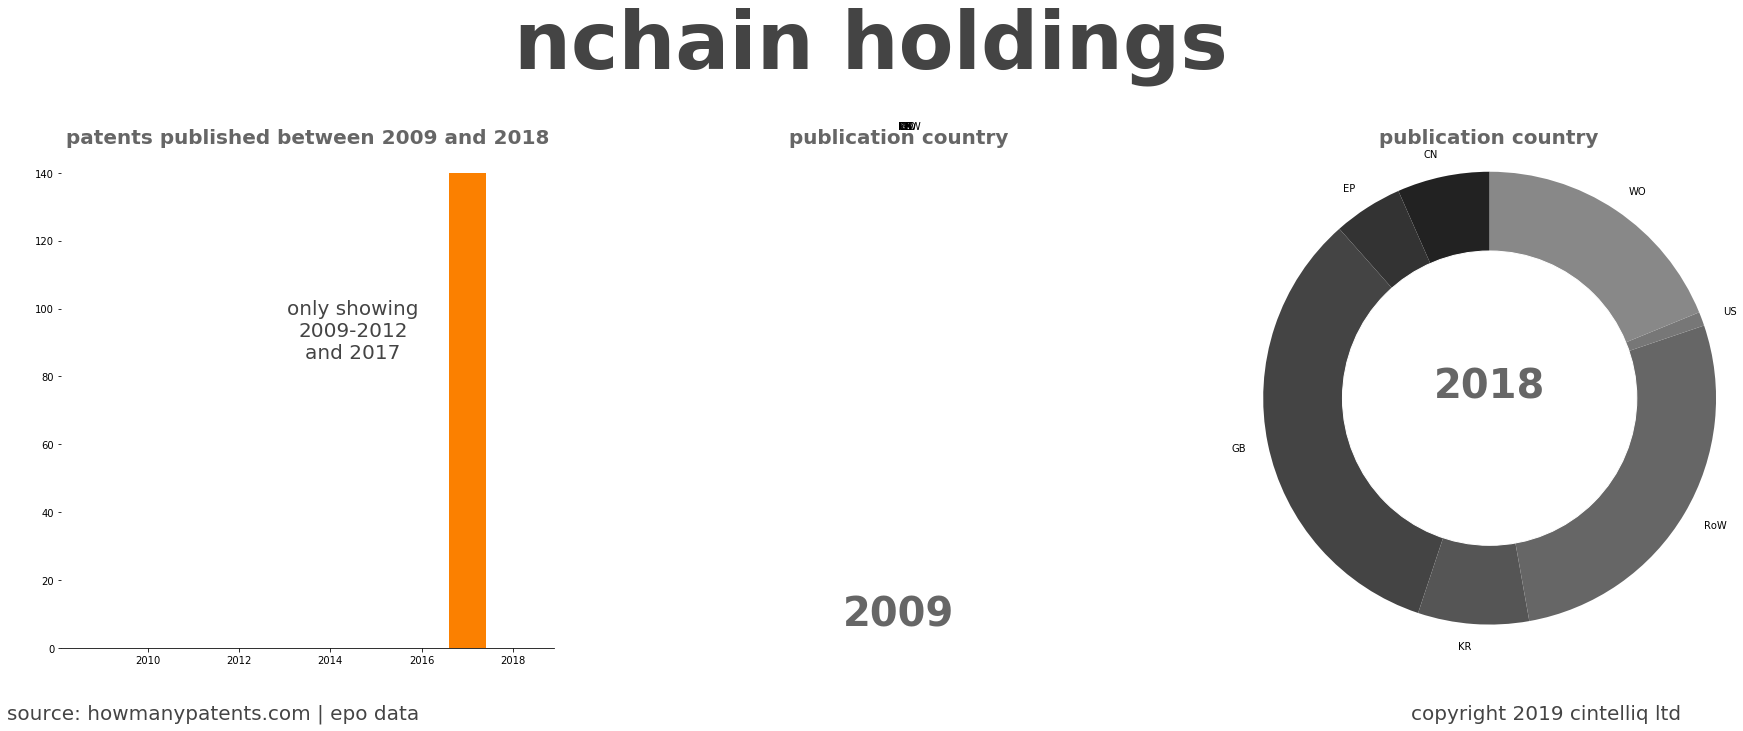 summary of patents for Nchain Holdings